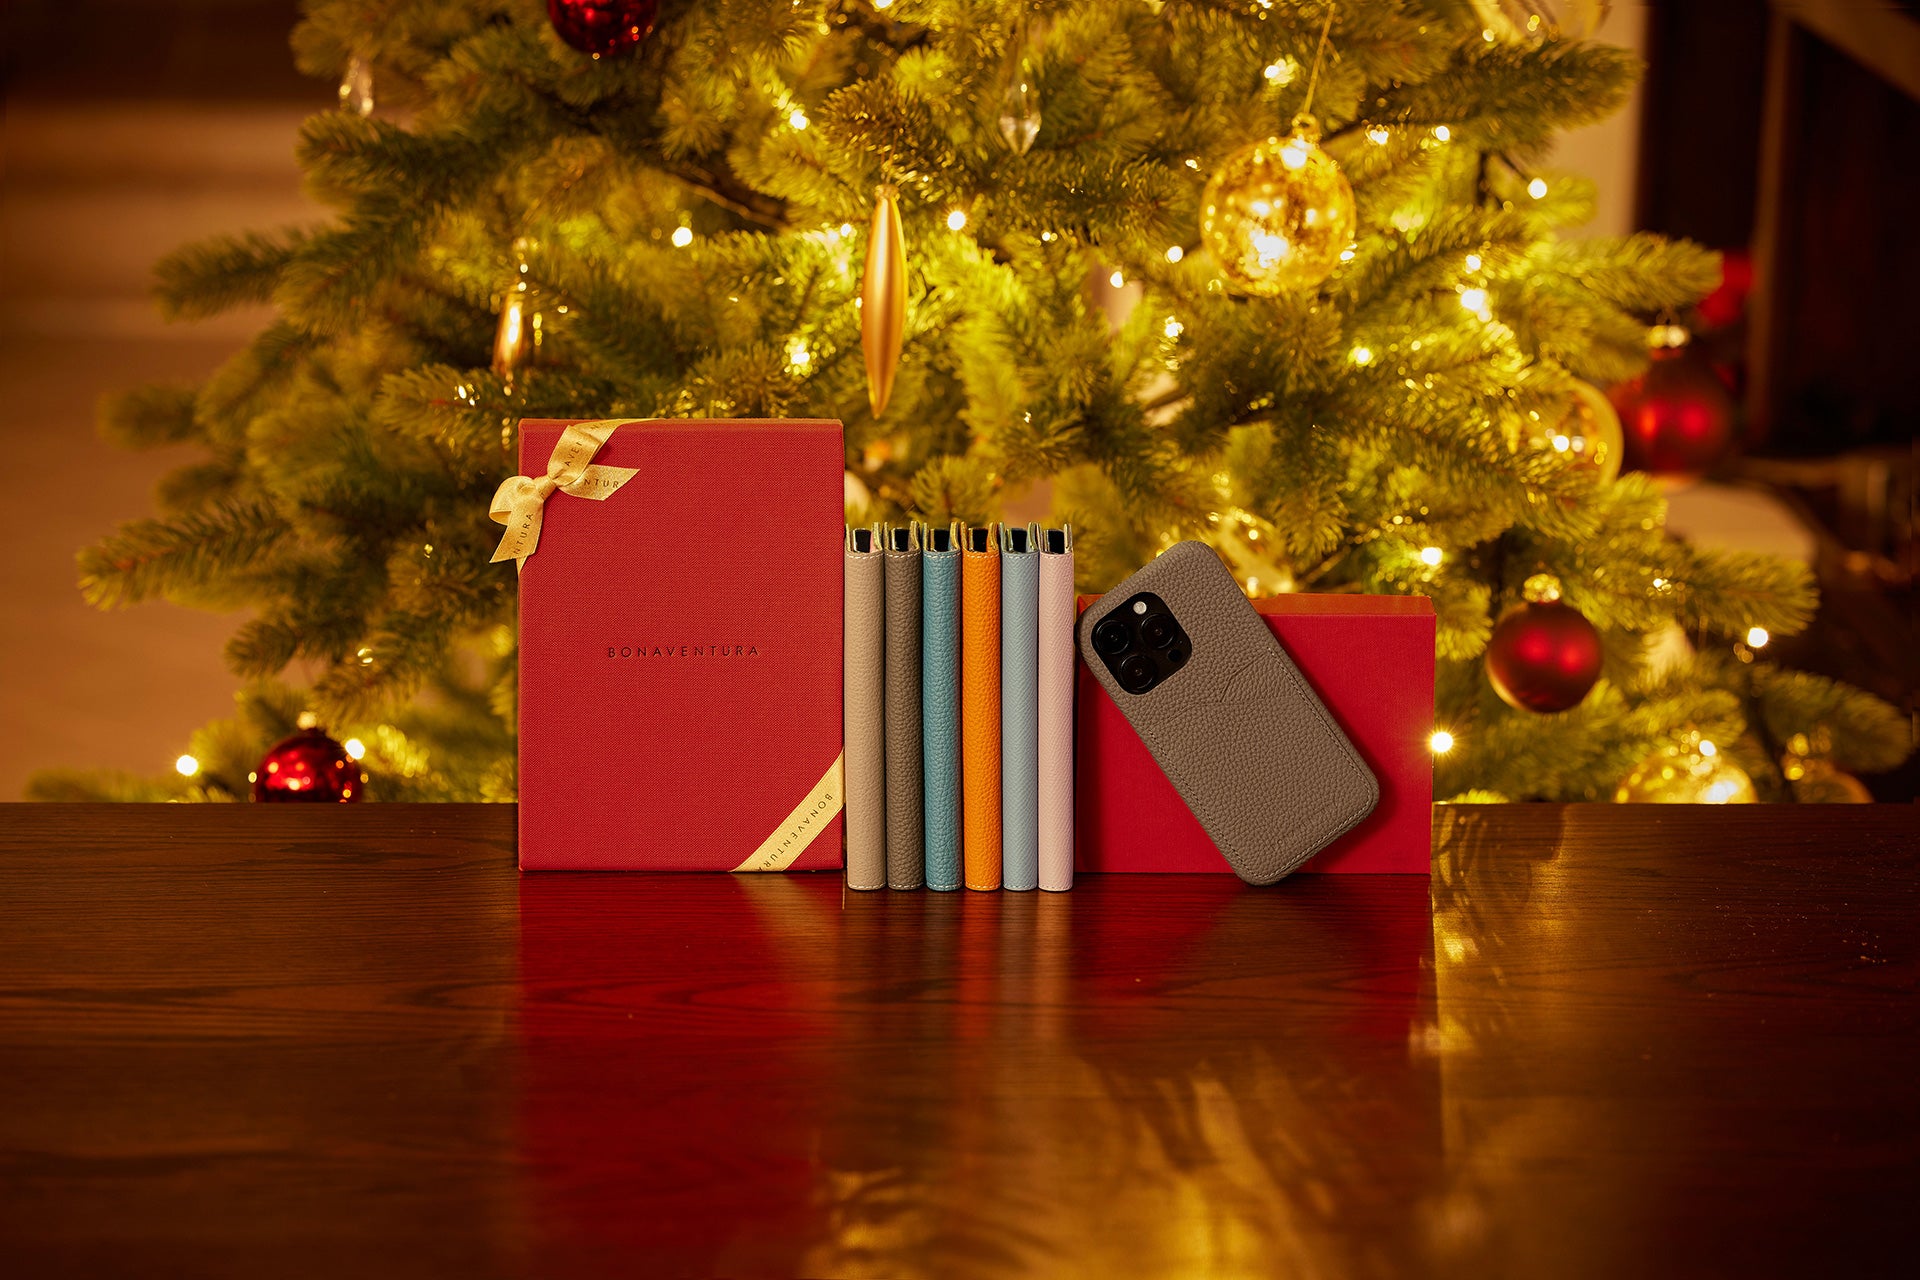 High-quality leather accessories such as iPhone leather cases from BONAVENTURA for style-conscious gifts